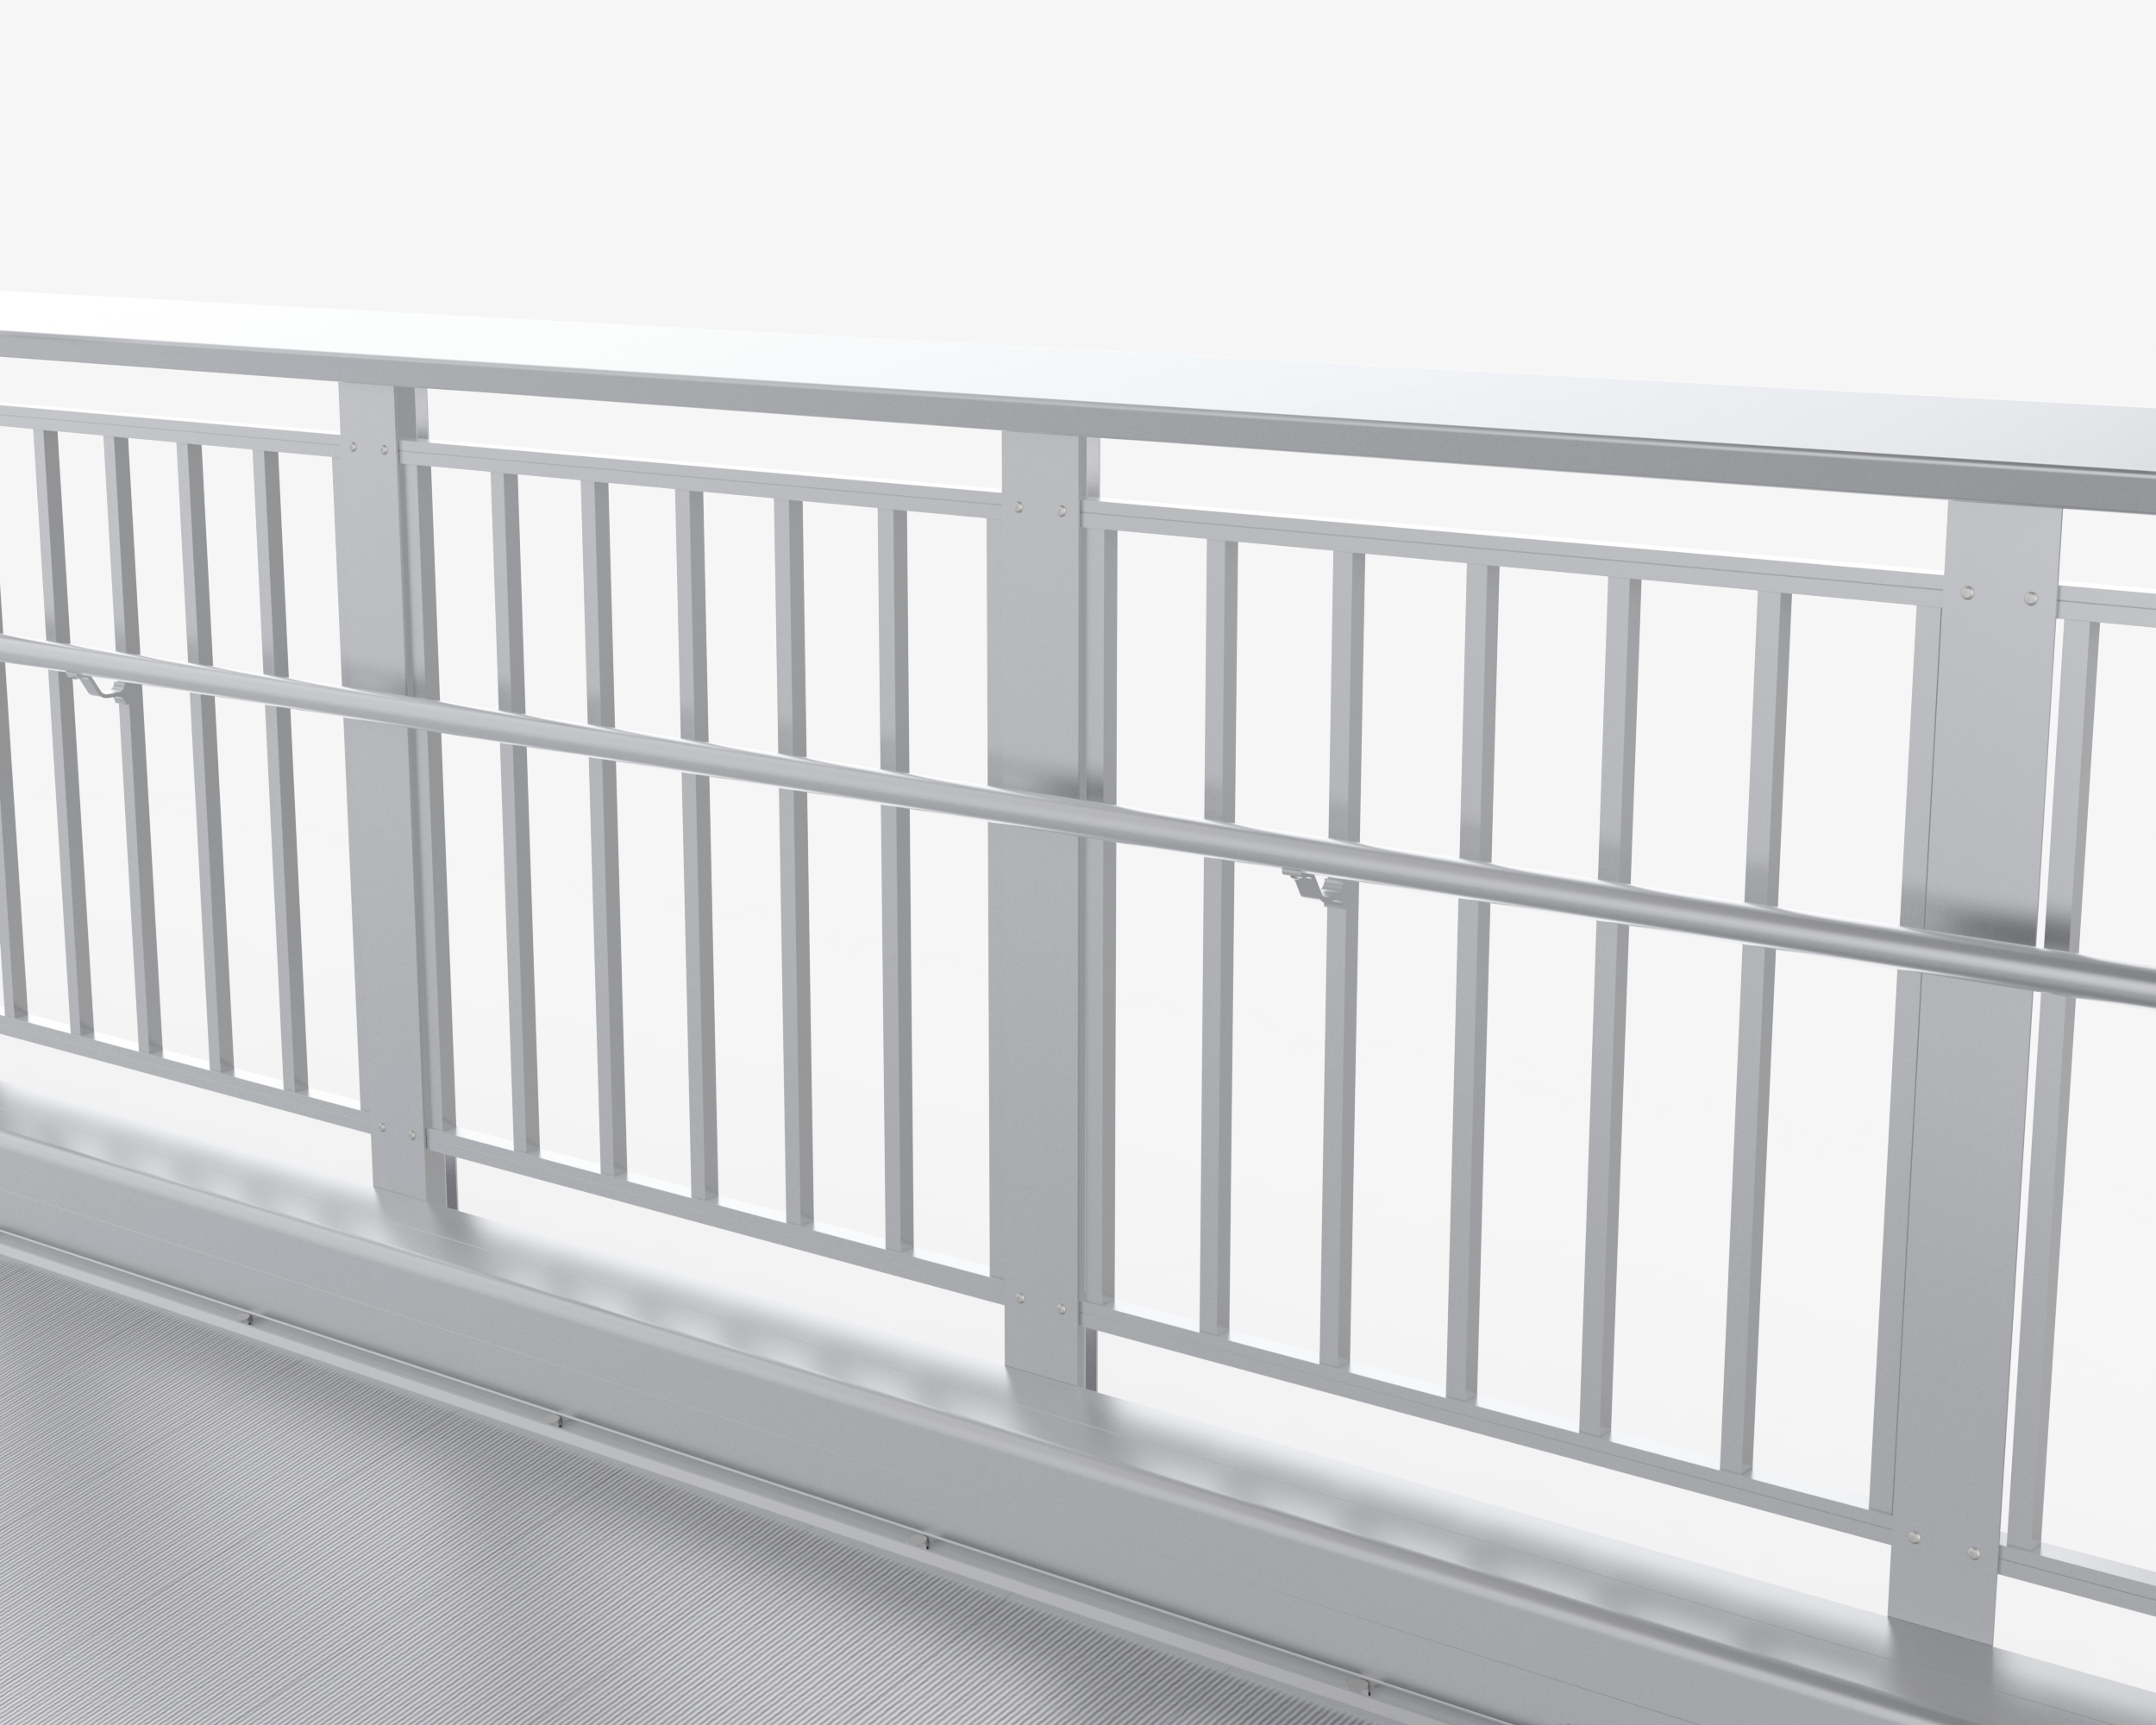 Handrails with 2 inch hand clearance on guardrail for weld-free aluminum bridge decking